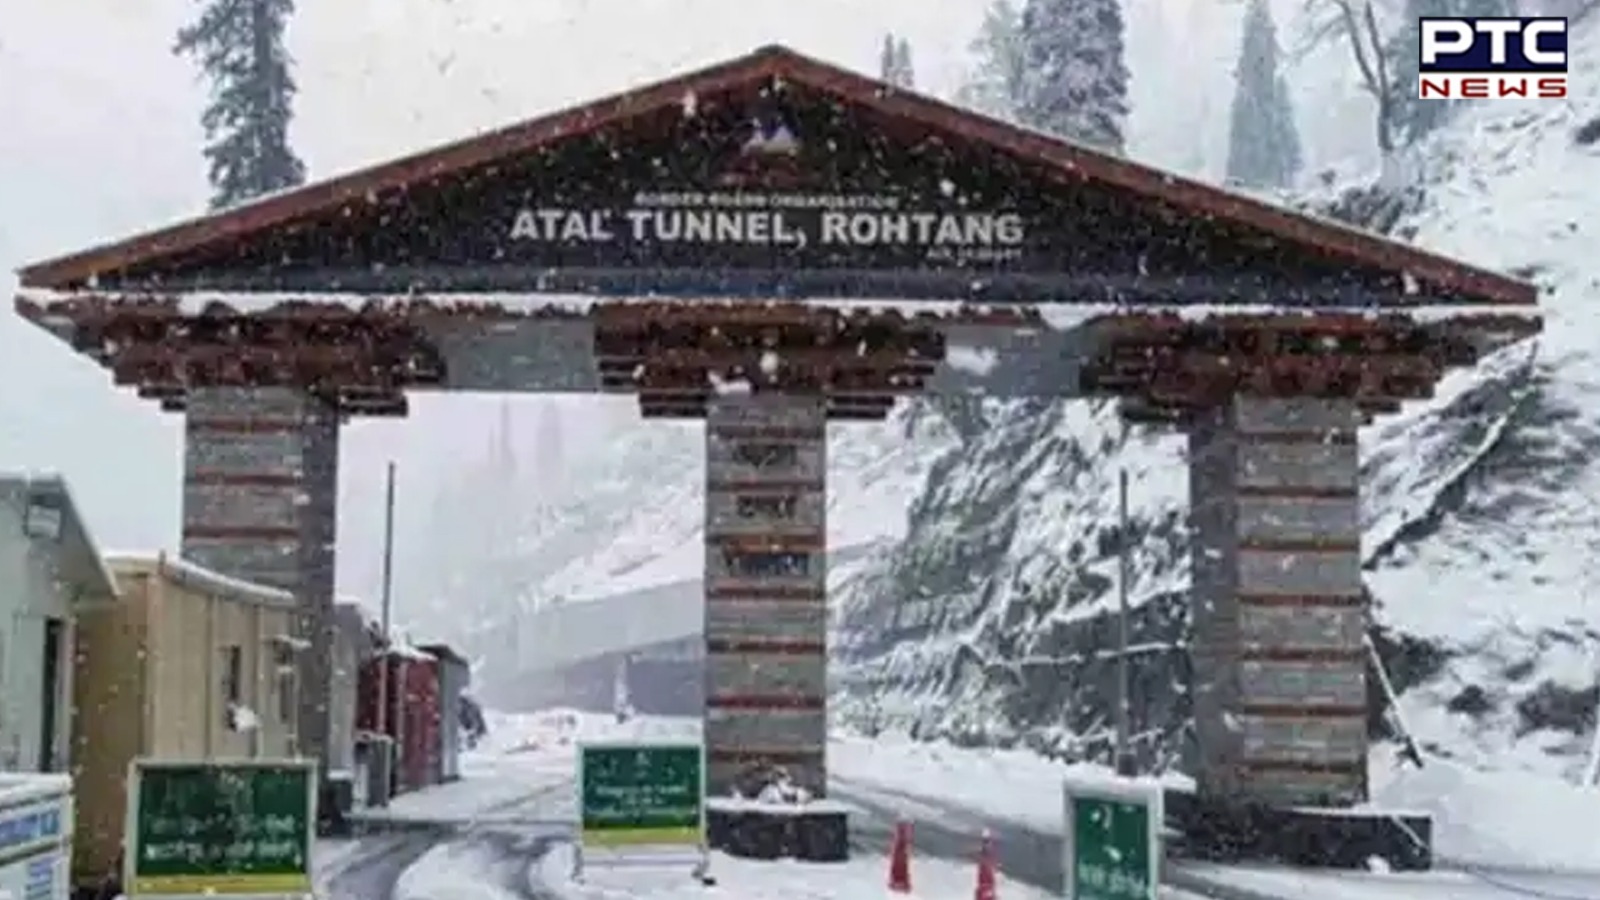 Season's first snow in upper Shimla; 300 tourists rescued at Atal Tunnel, Manali